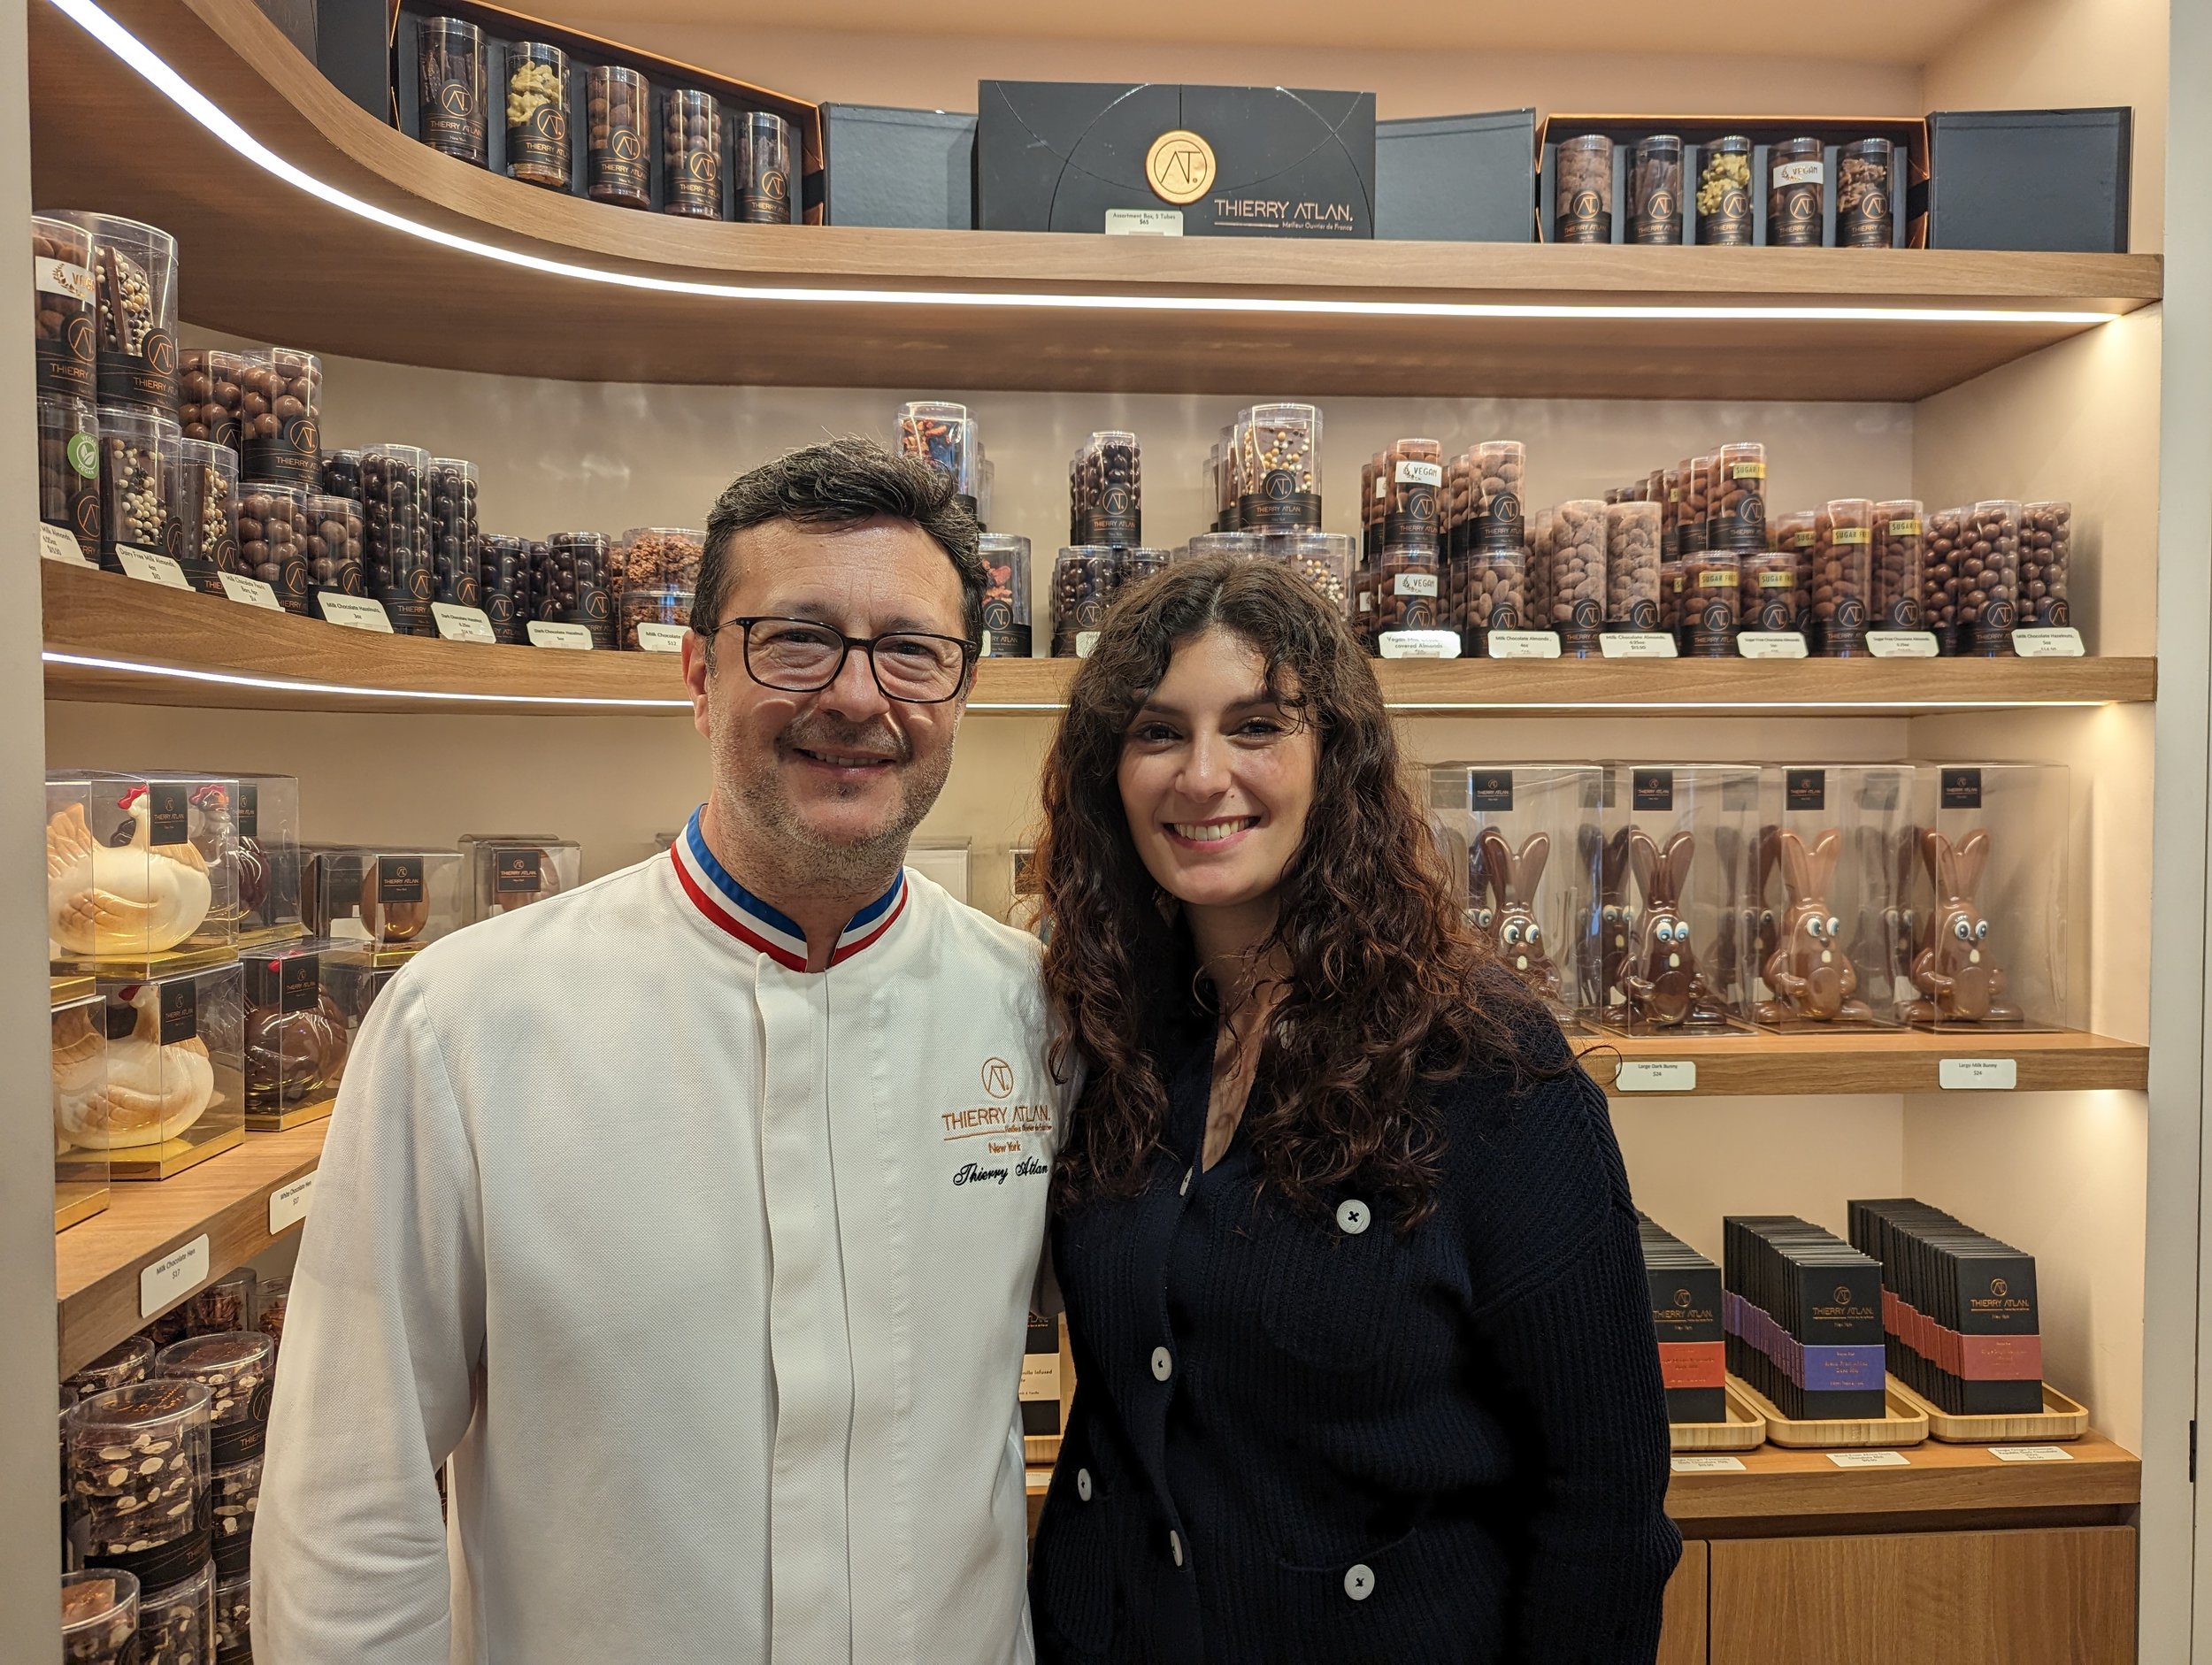 Thierry Atlan: Father and Daughter in a Sweet Family Business